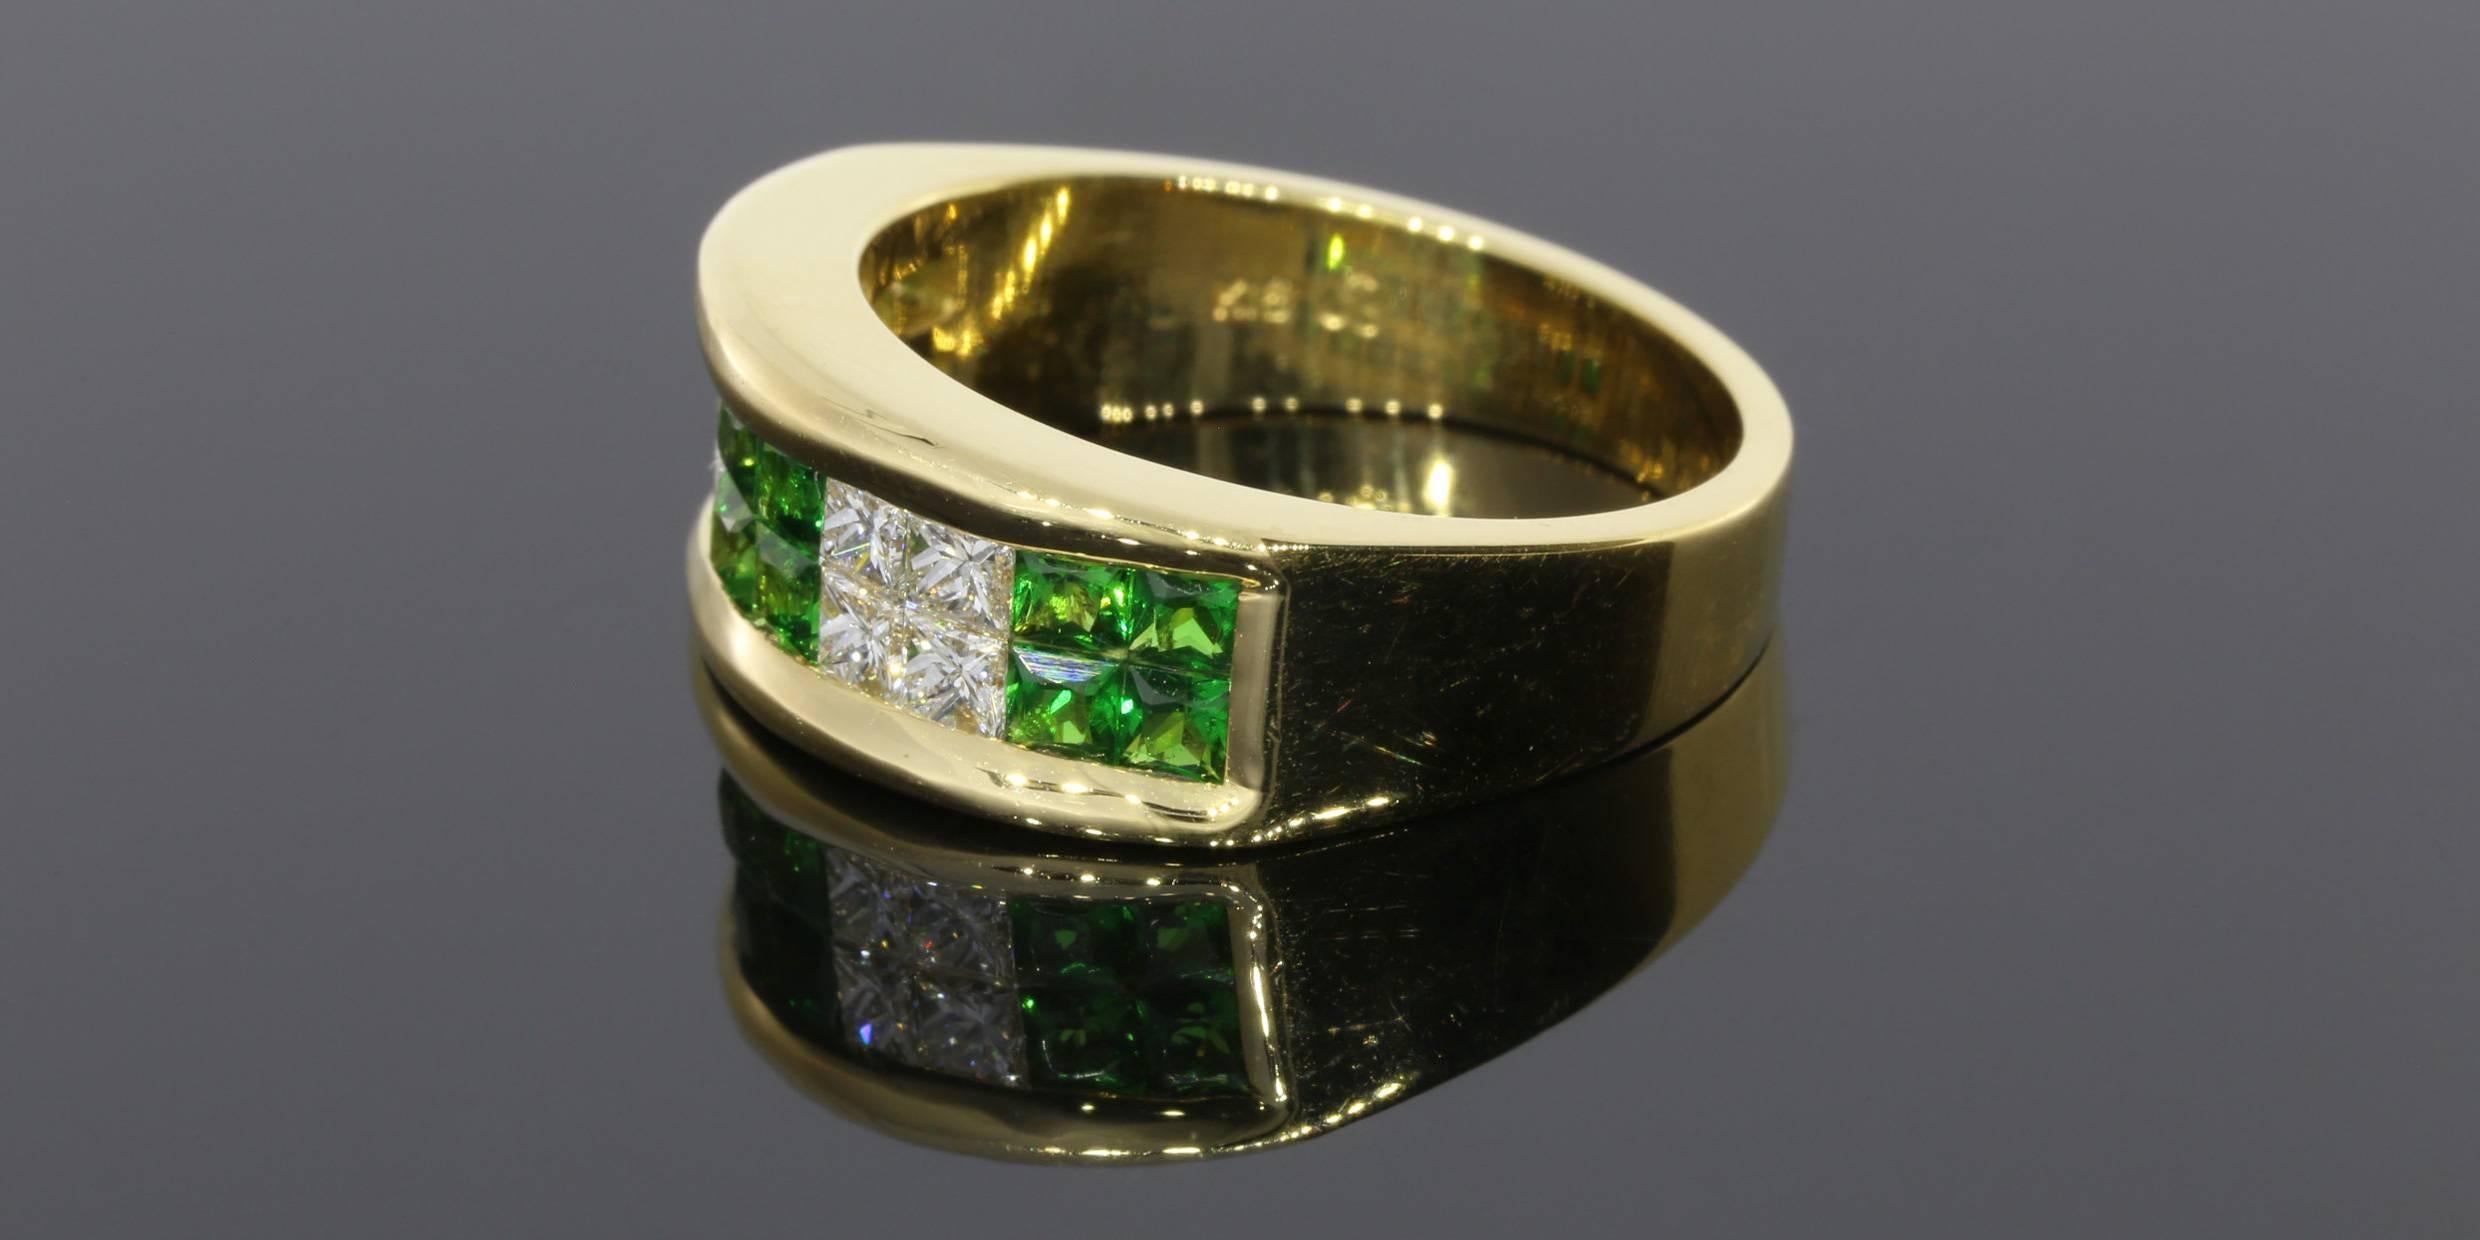 This gorgeous & unique band features princess cut tsavorite garnets that have a wonderfully vibrant green color. It also features top quality, princess cut diamonds. These stones are channel & illusion set in 2 rows across an 18 karat yellow gold